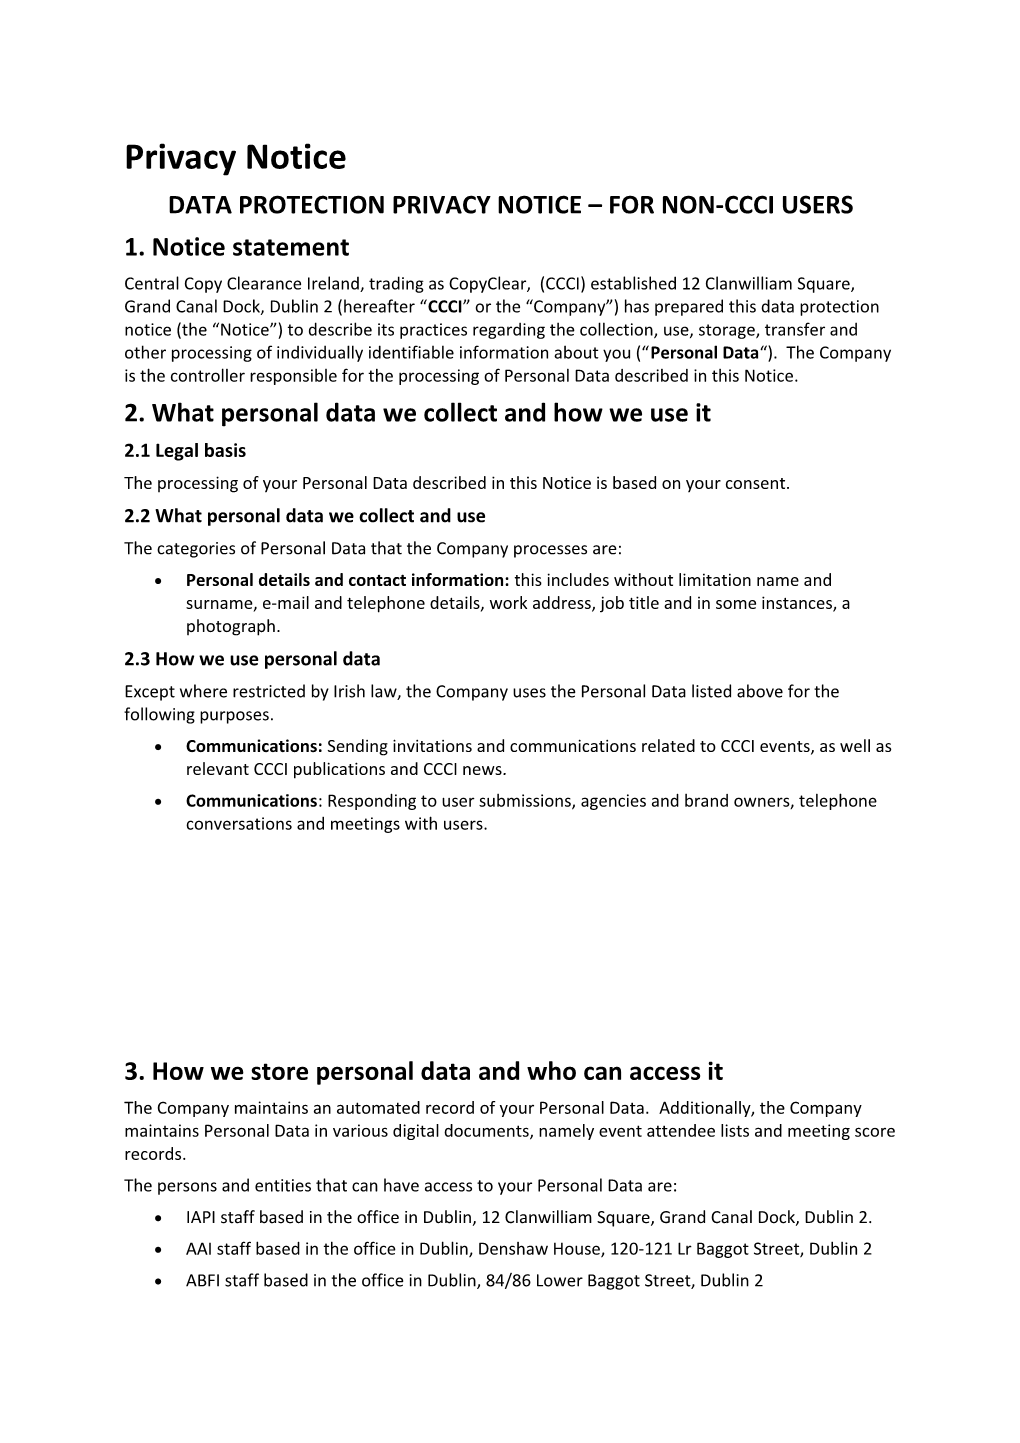 Data Protection Privacy Notice for Non-Ccciusers